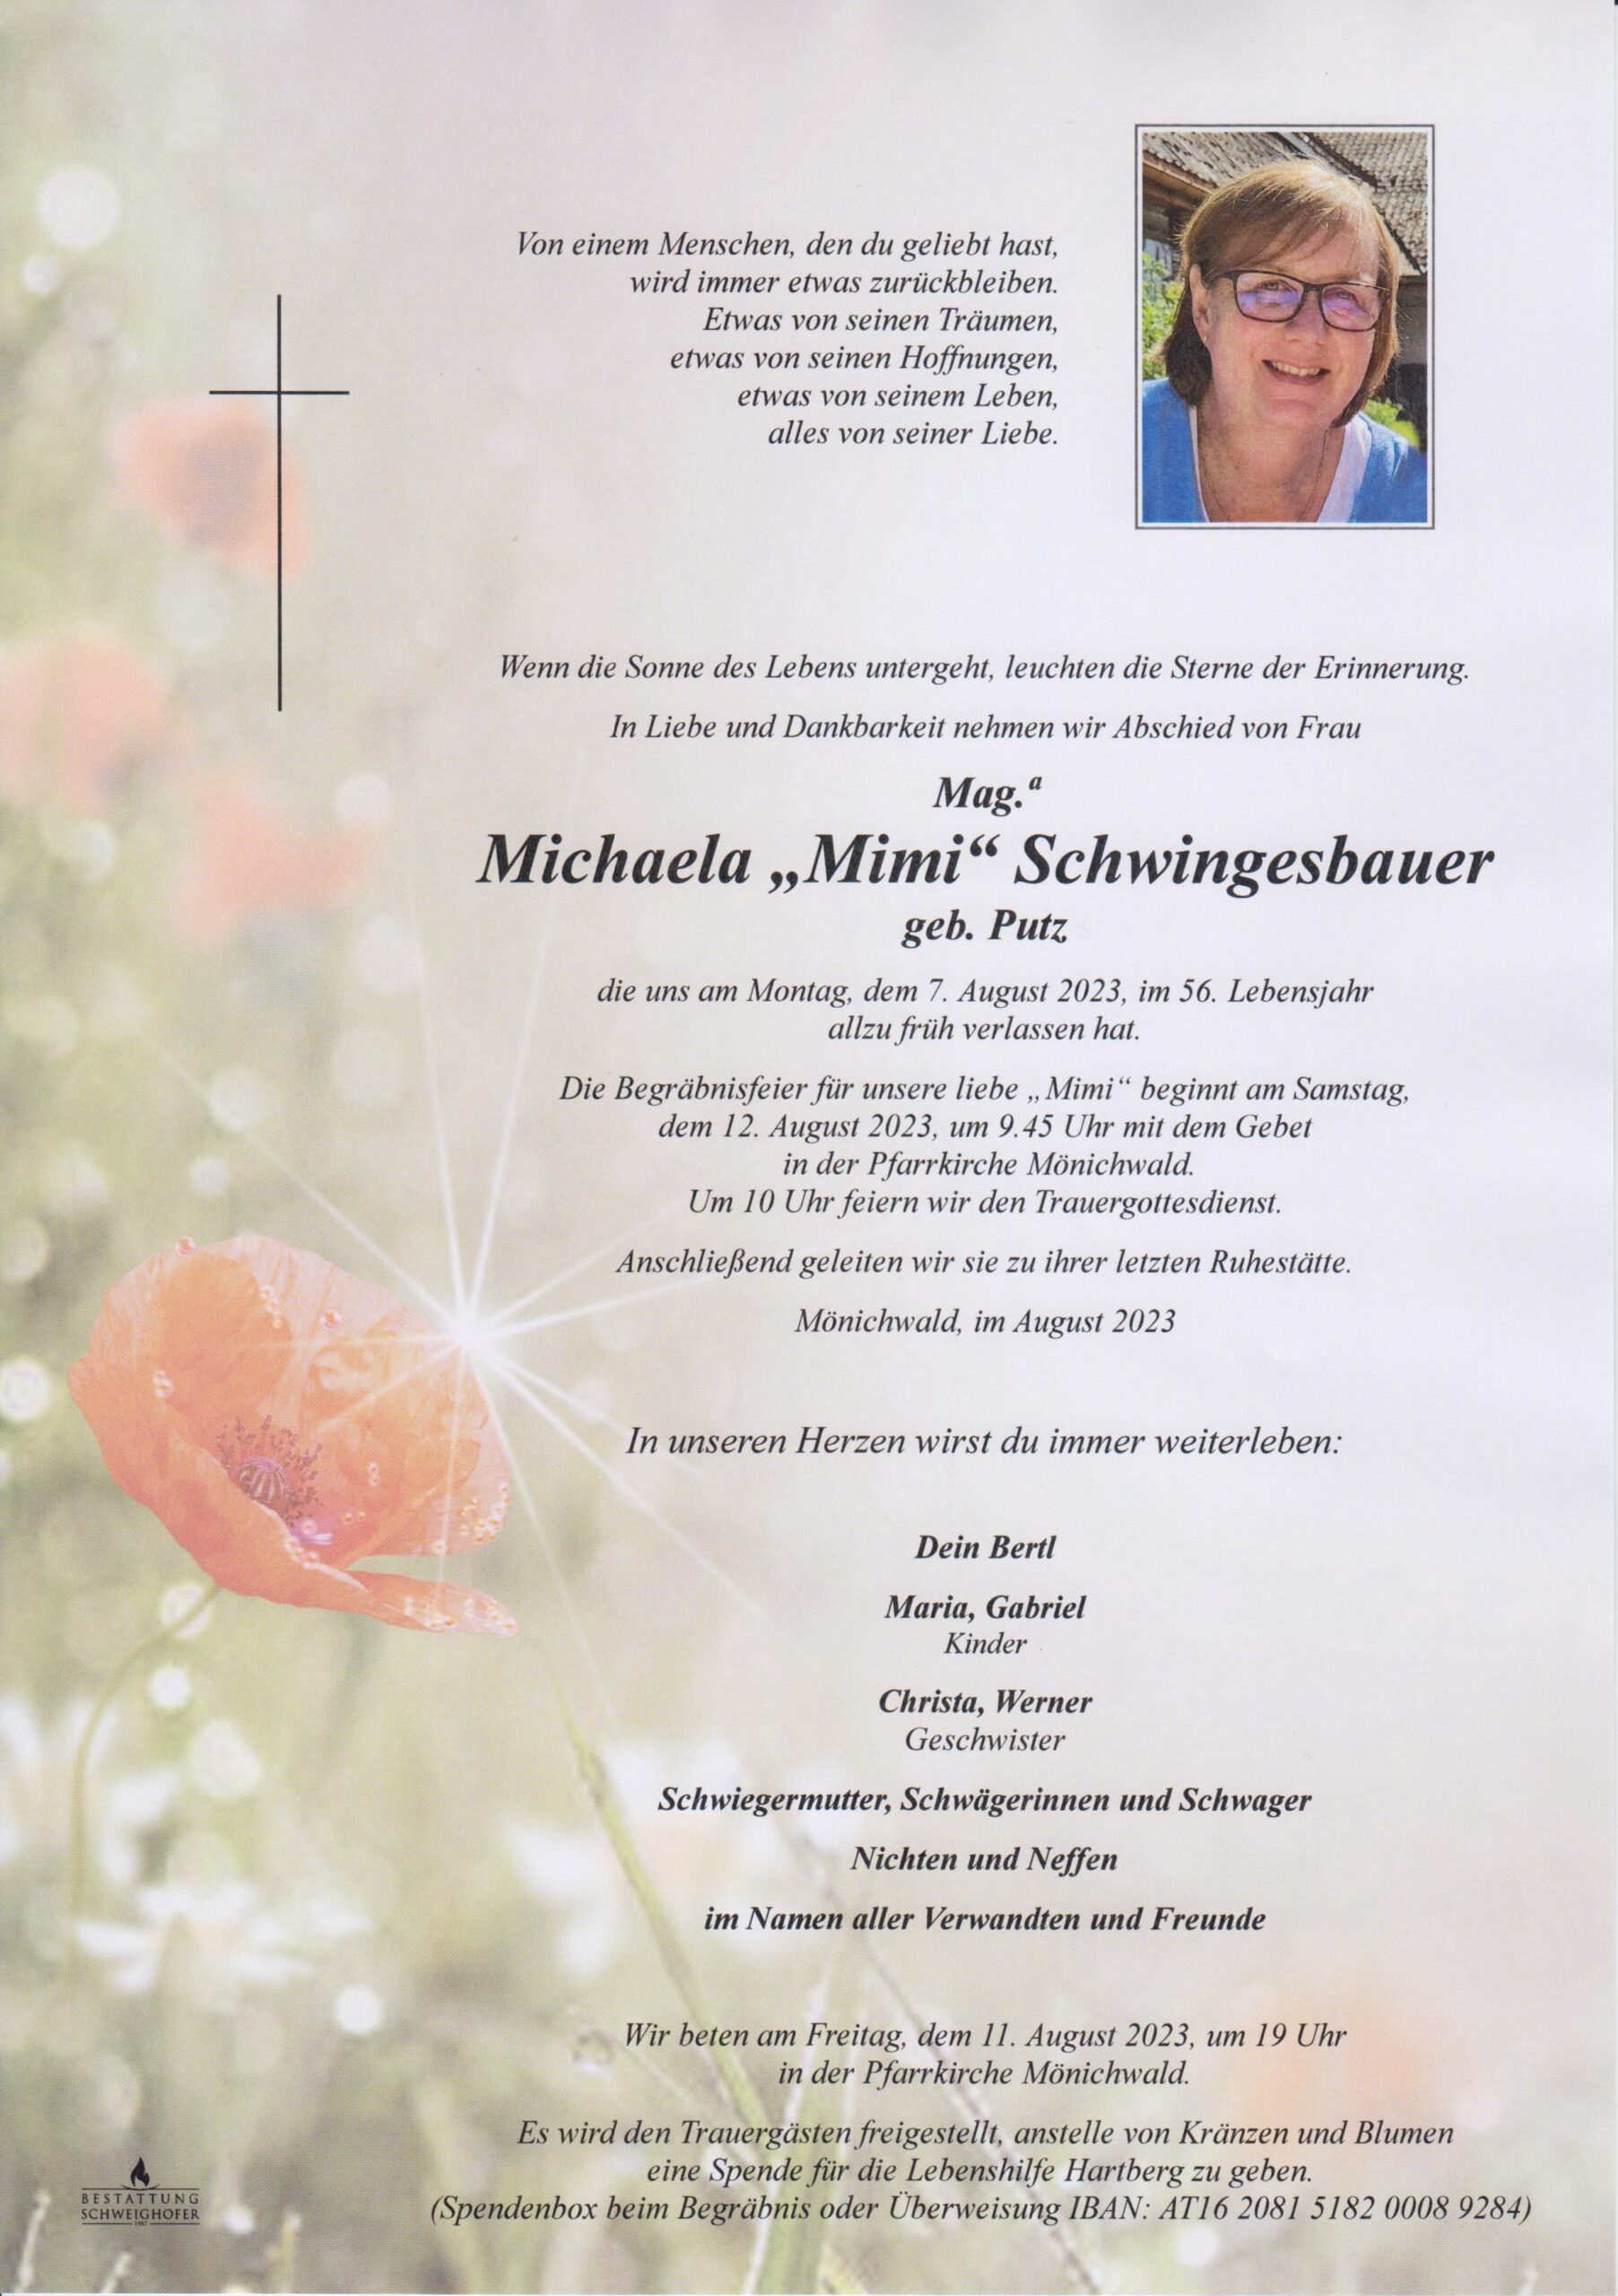 You are currently viewing Michaela Schwingesbauer